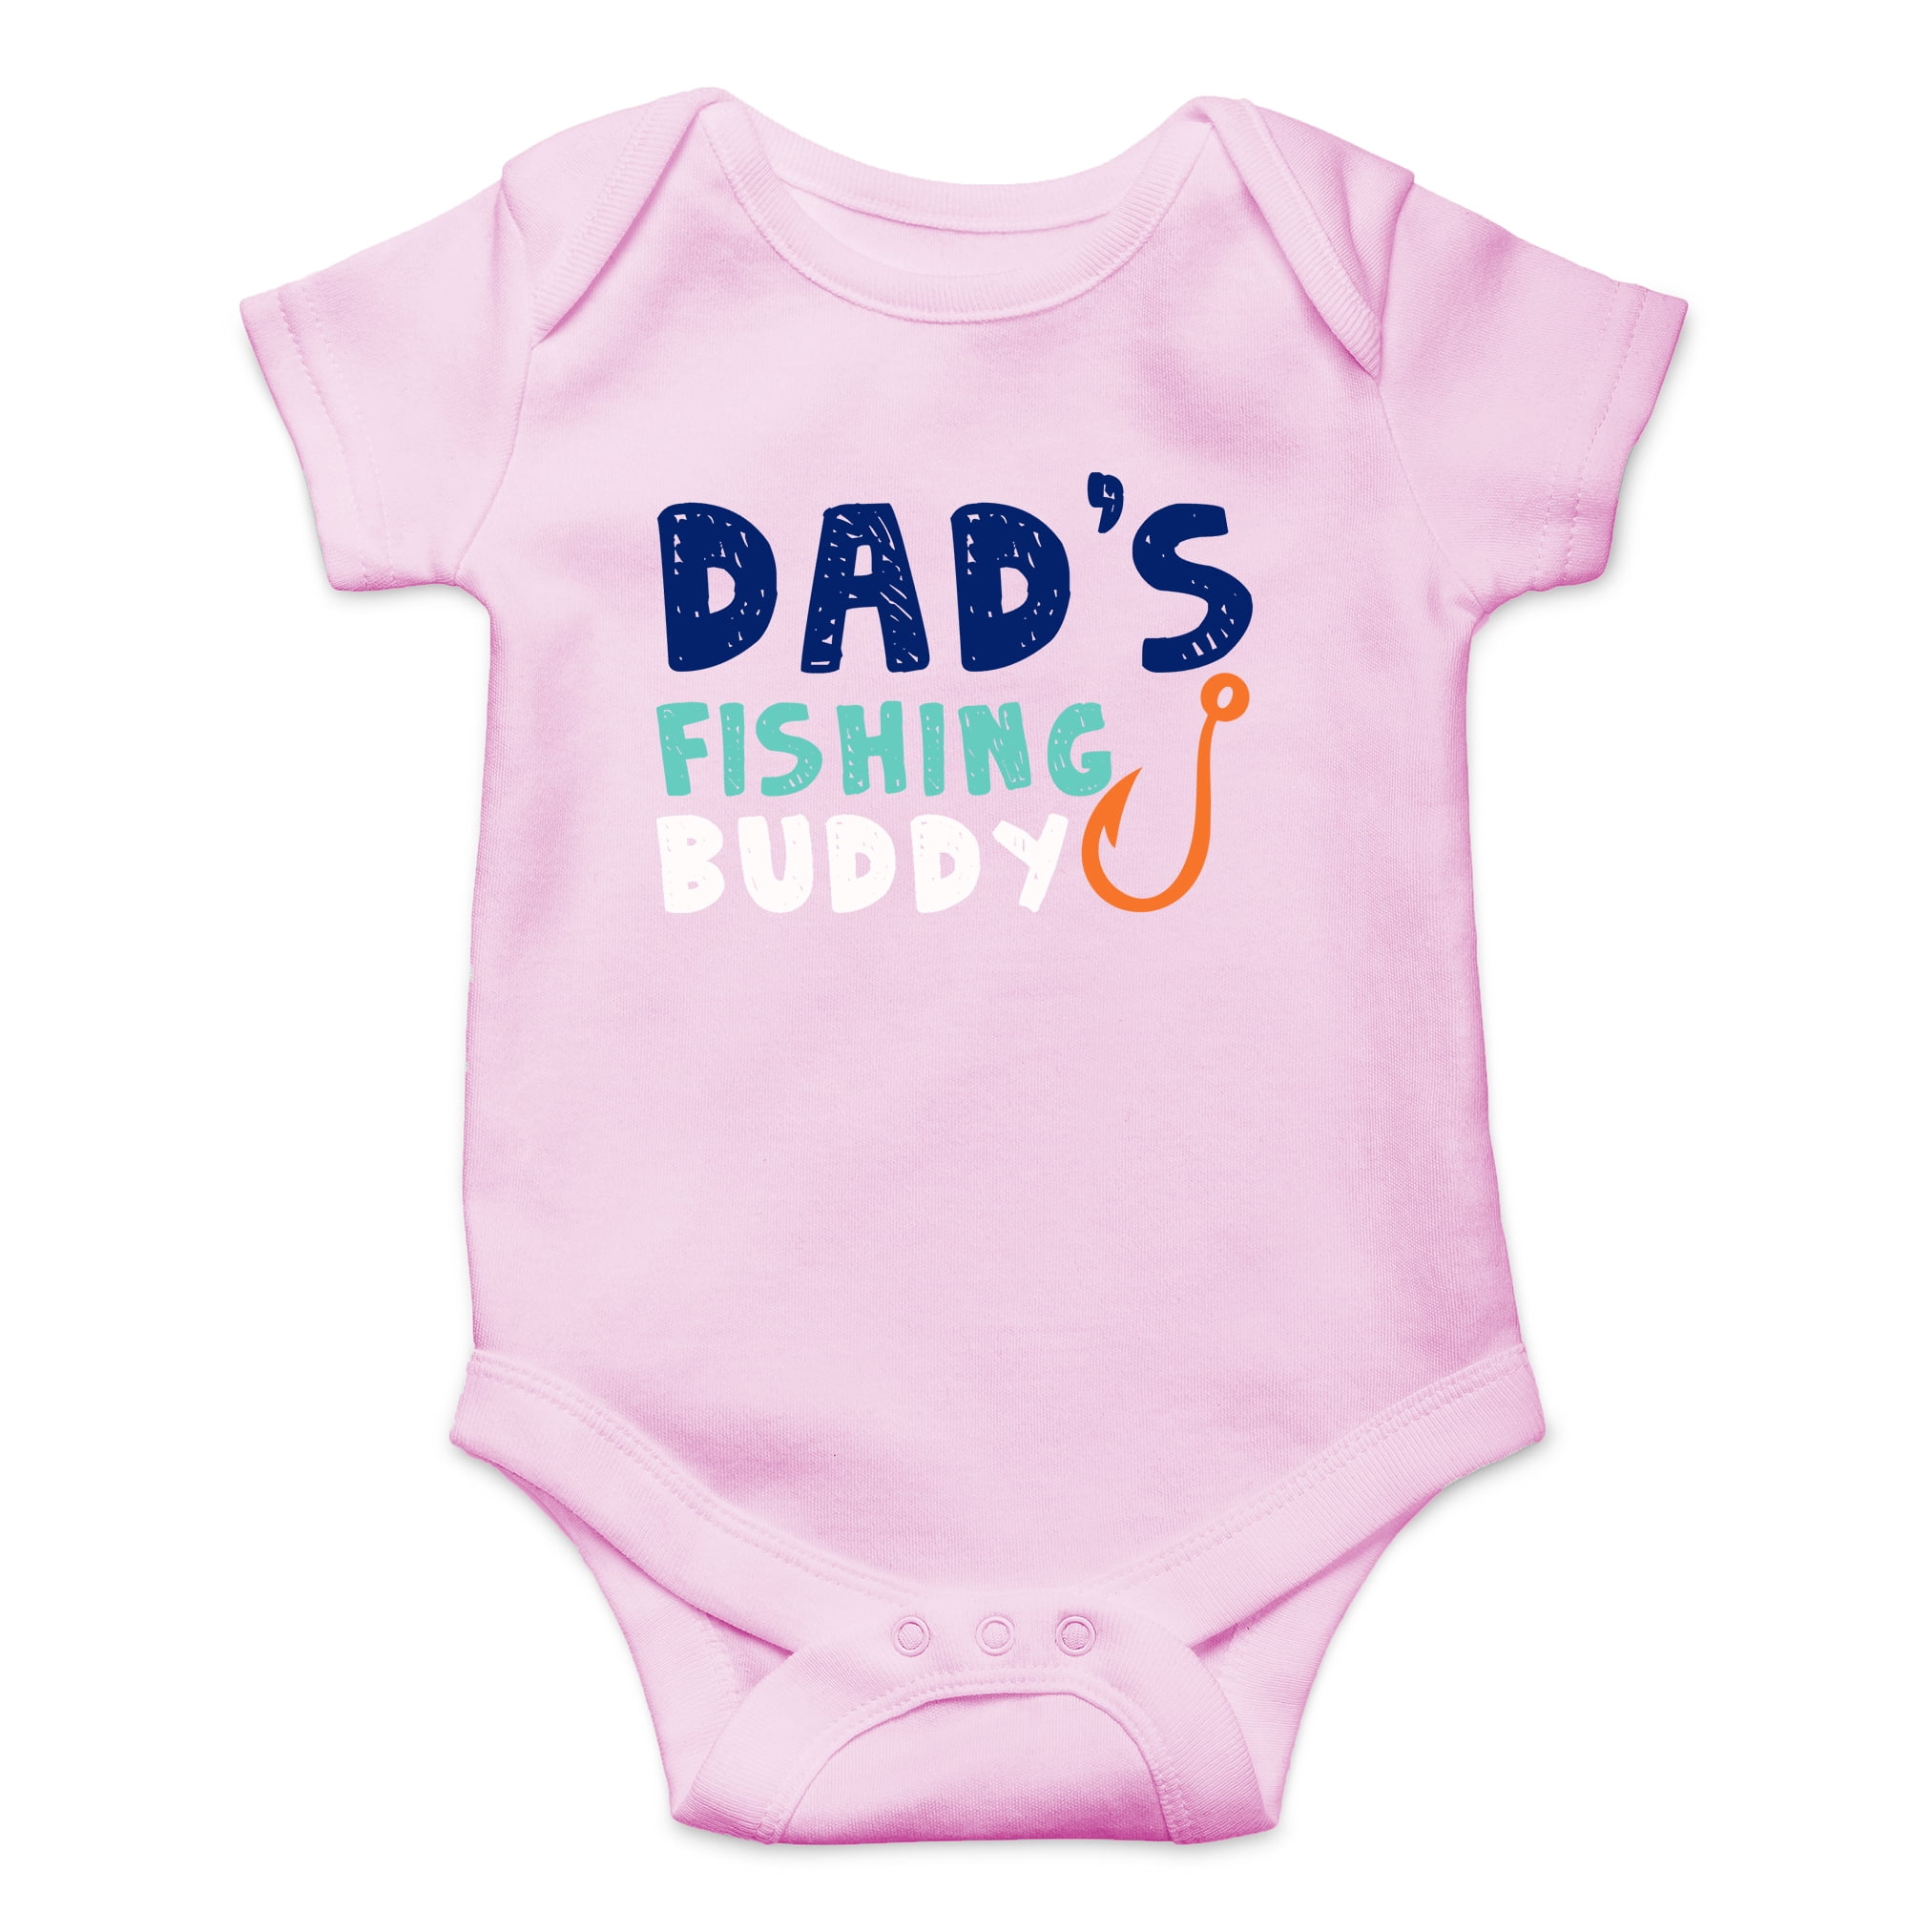 Jesus Loves Me And So Does My Daddy Toddler Baby Cotton Bodysuit One Piece 